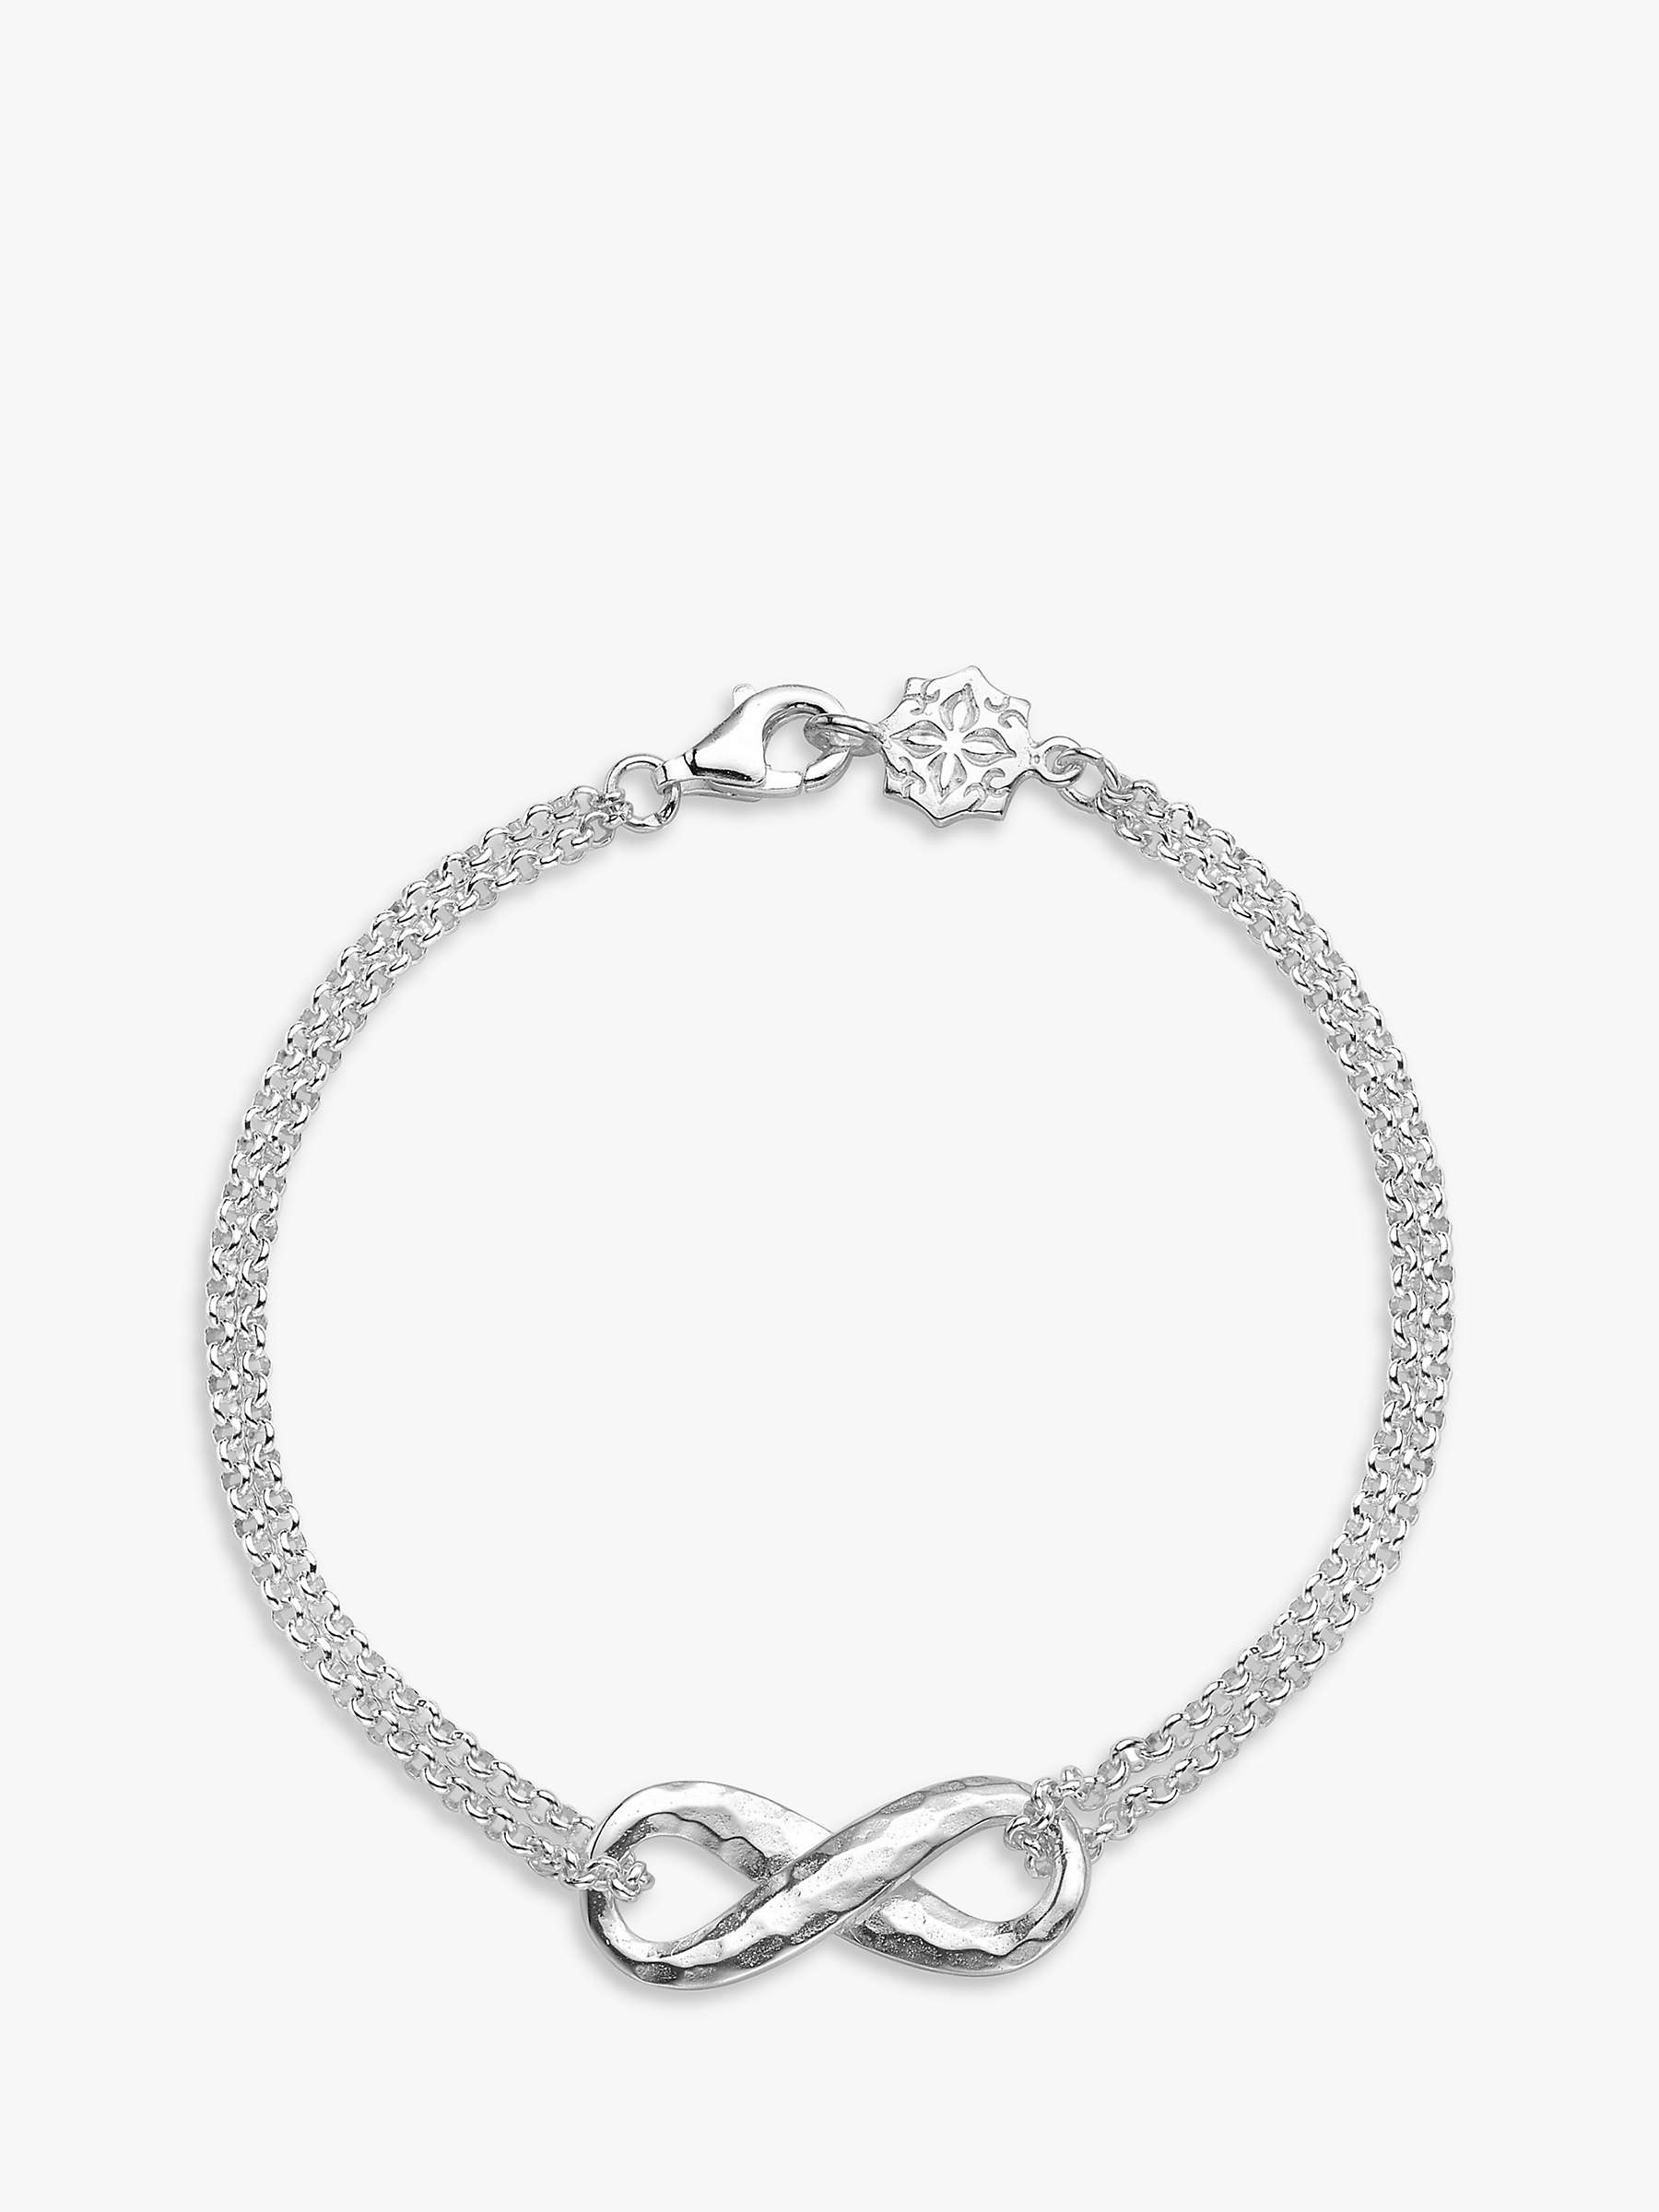 Buy Dower & Hall Sterling Silver Entwined Infinity Bracelet, Silver Online at johnlewis.com